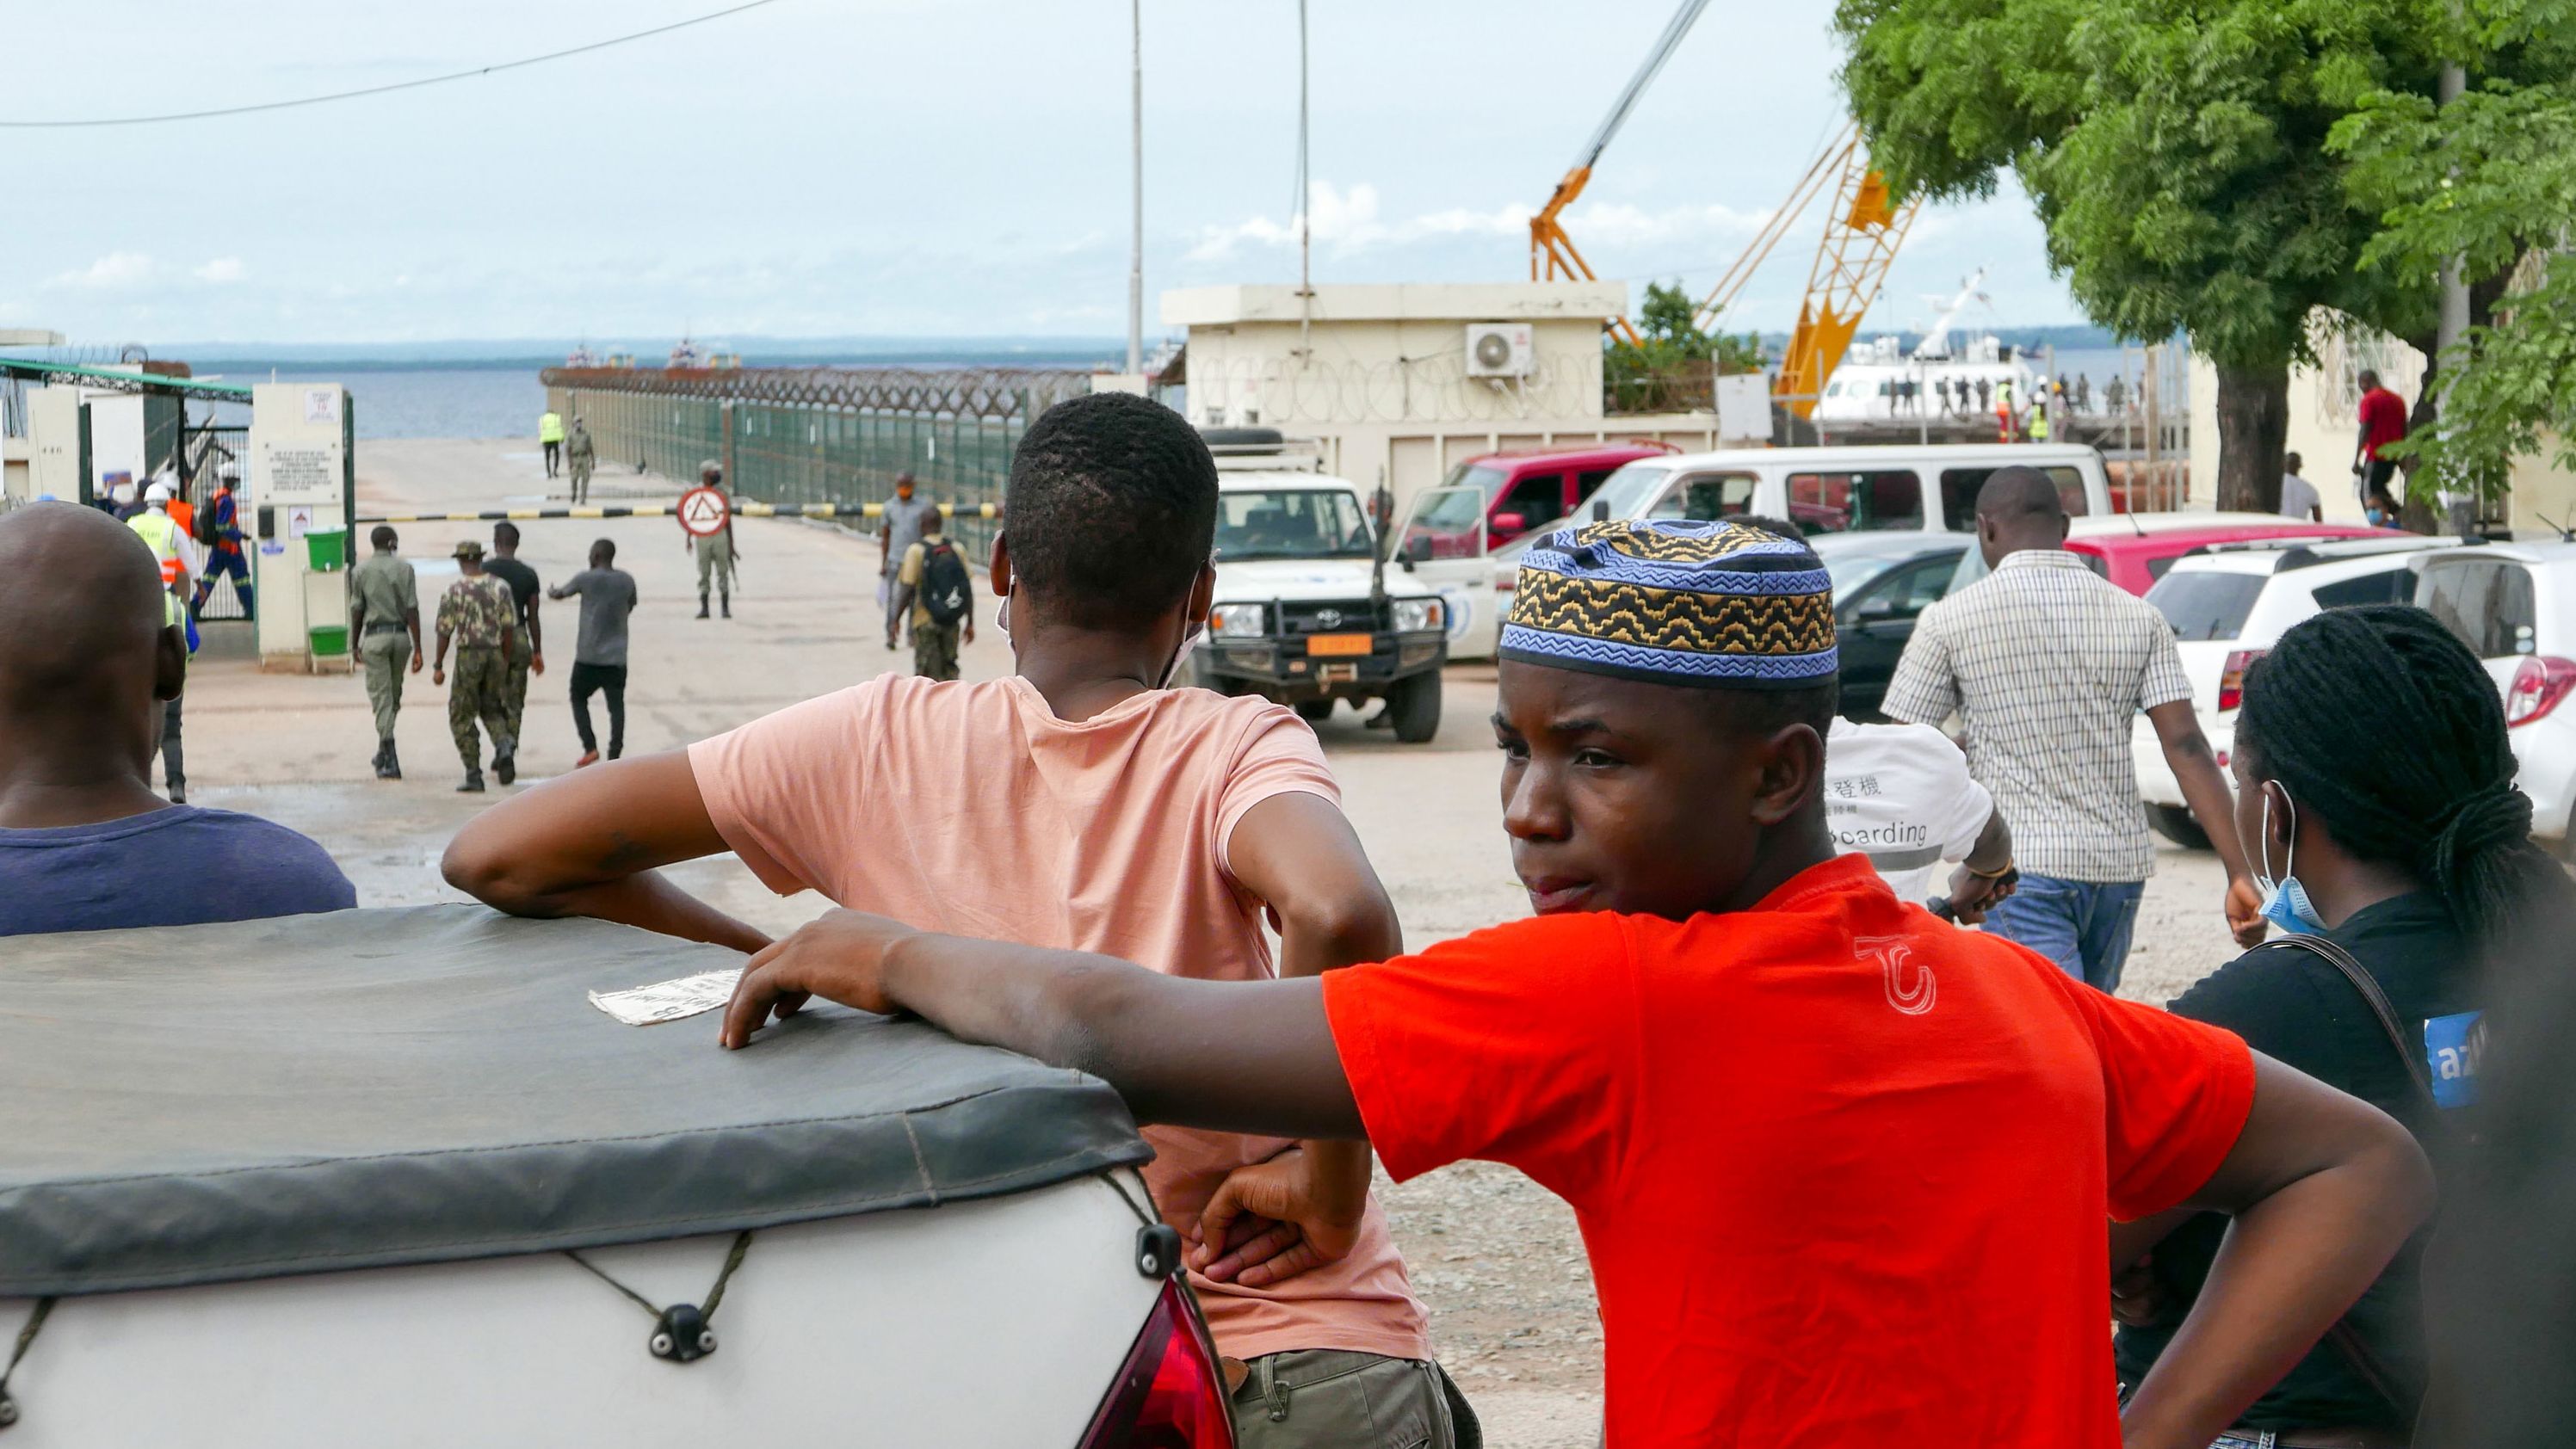 People in Pemba, Mozambique await the arrival of more ships from Palma as people flee attacks by rebel groups on March 29.